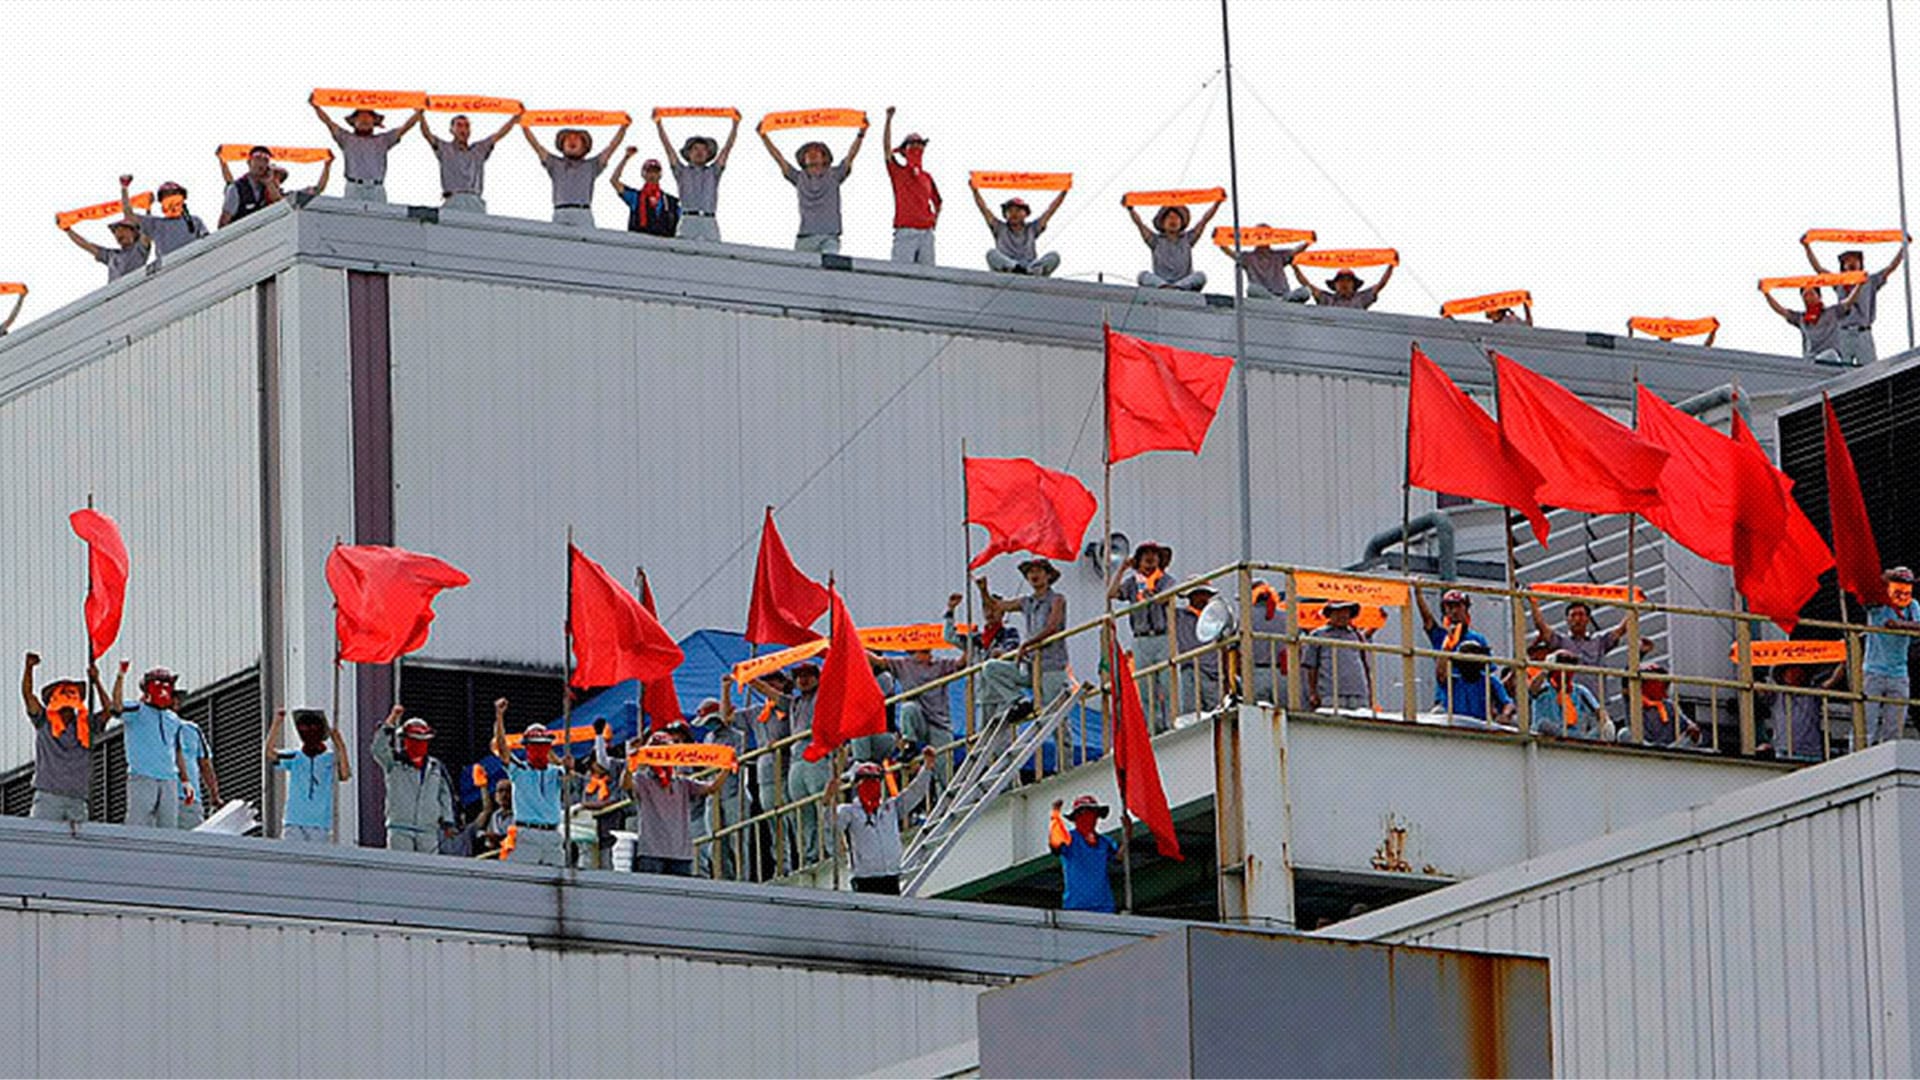 Photo of many workers on top of South Korean factory with red flags and banners